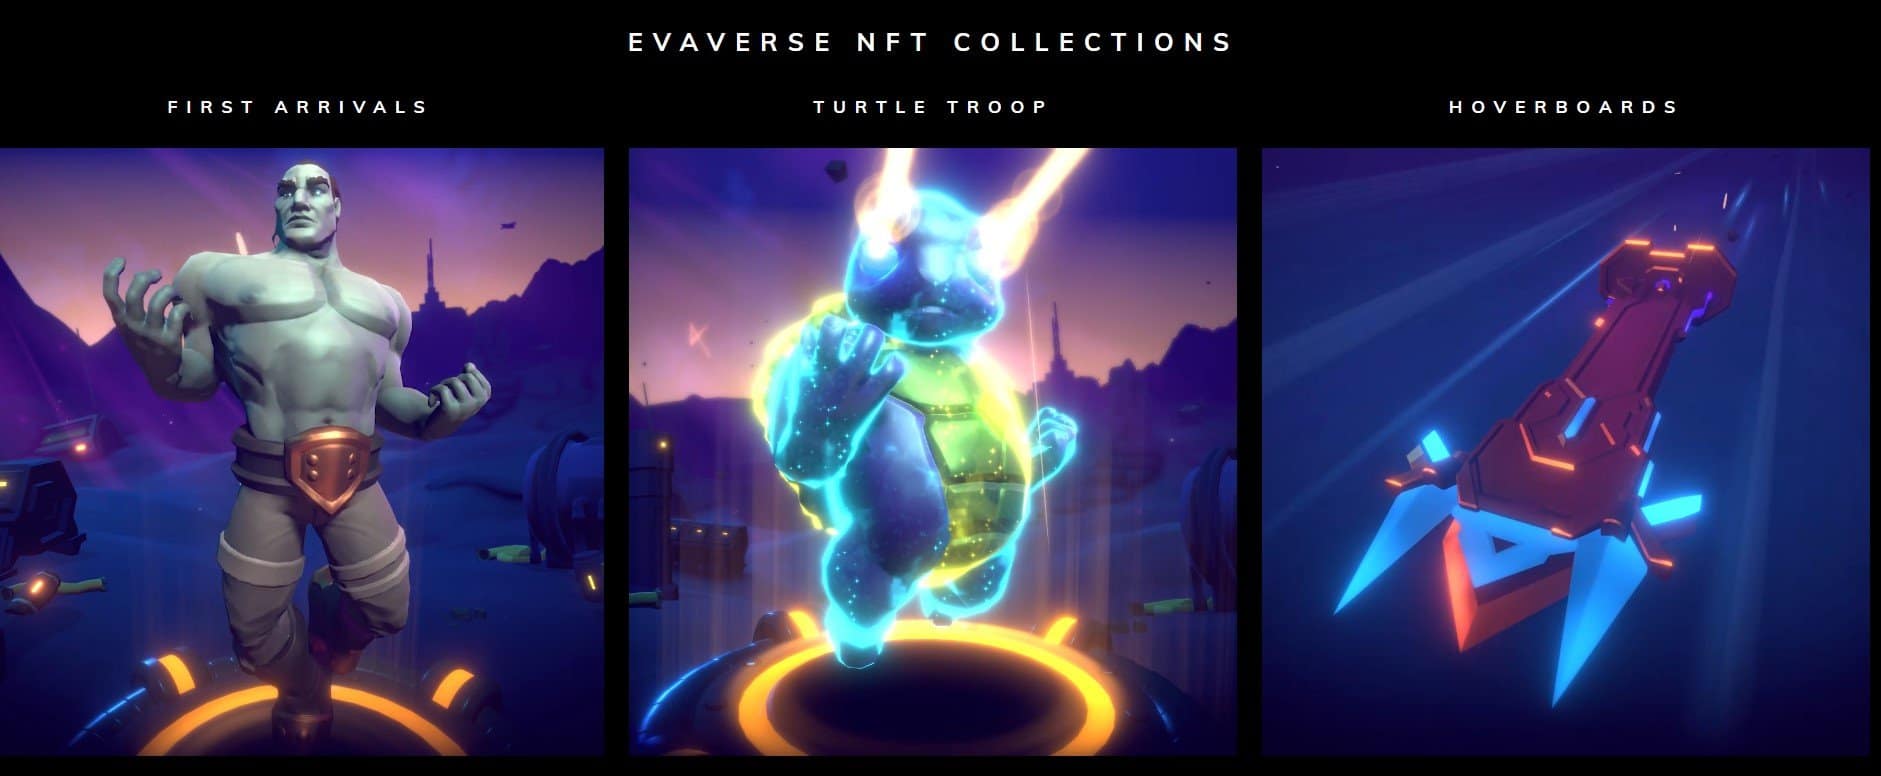 Screengrab from Evaverse website displaying the different NFT collections that are part of its in-metaverse games.